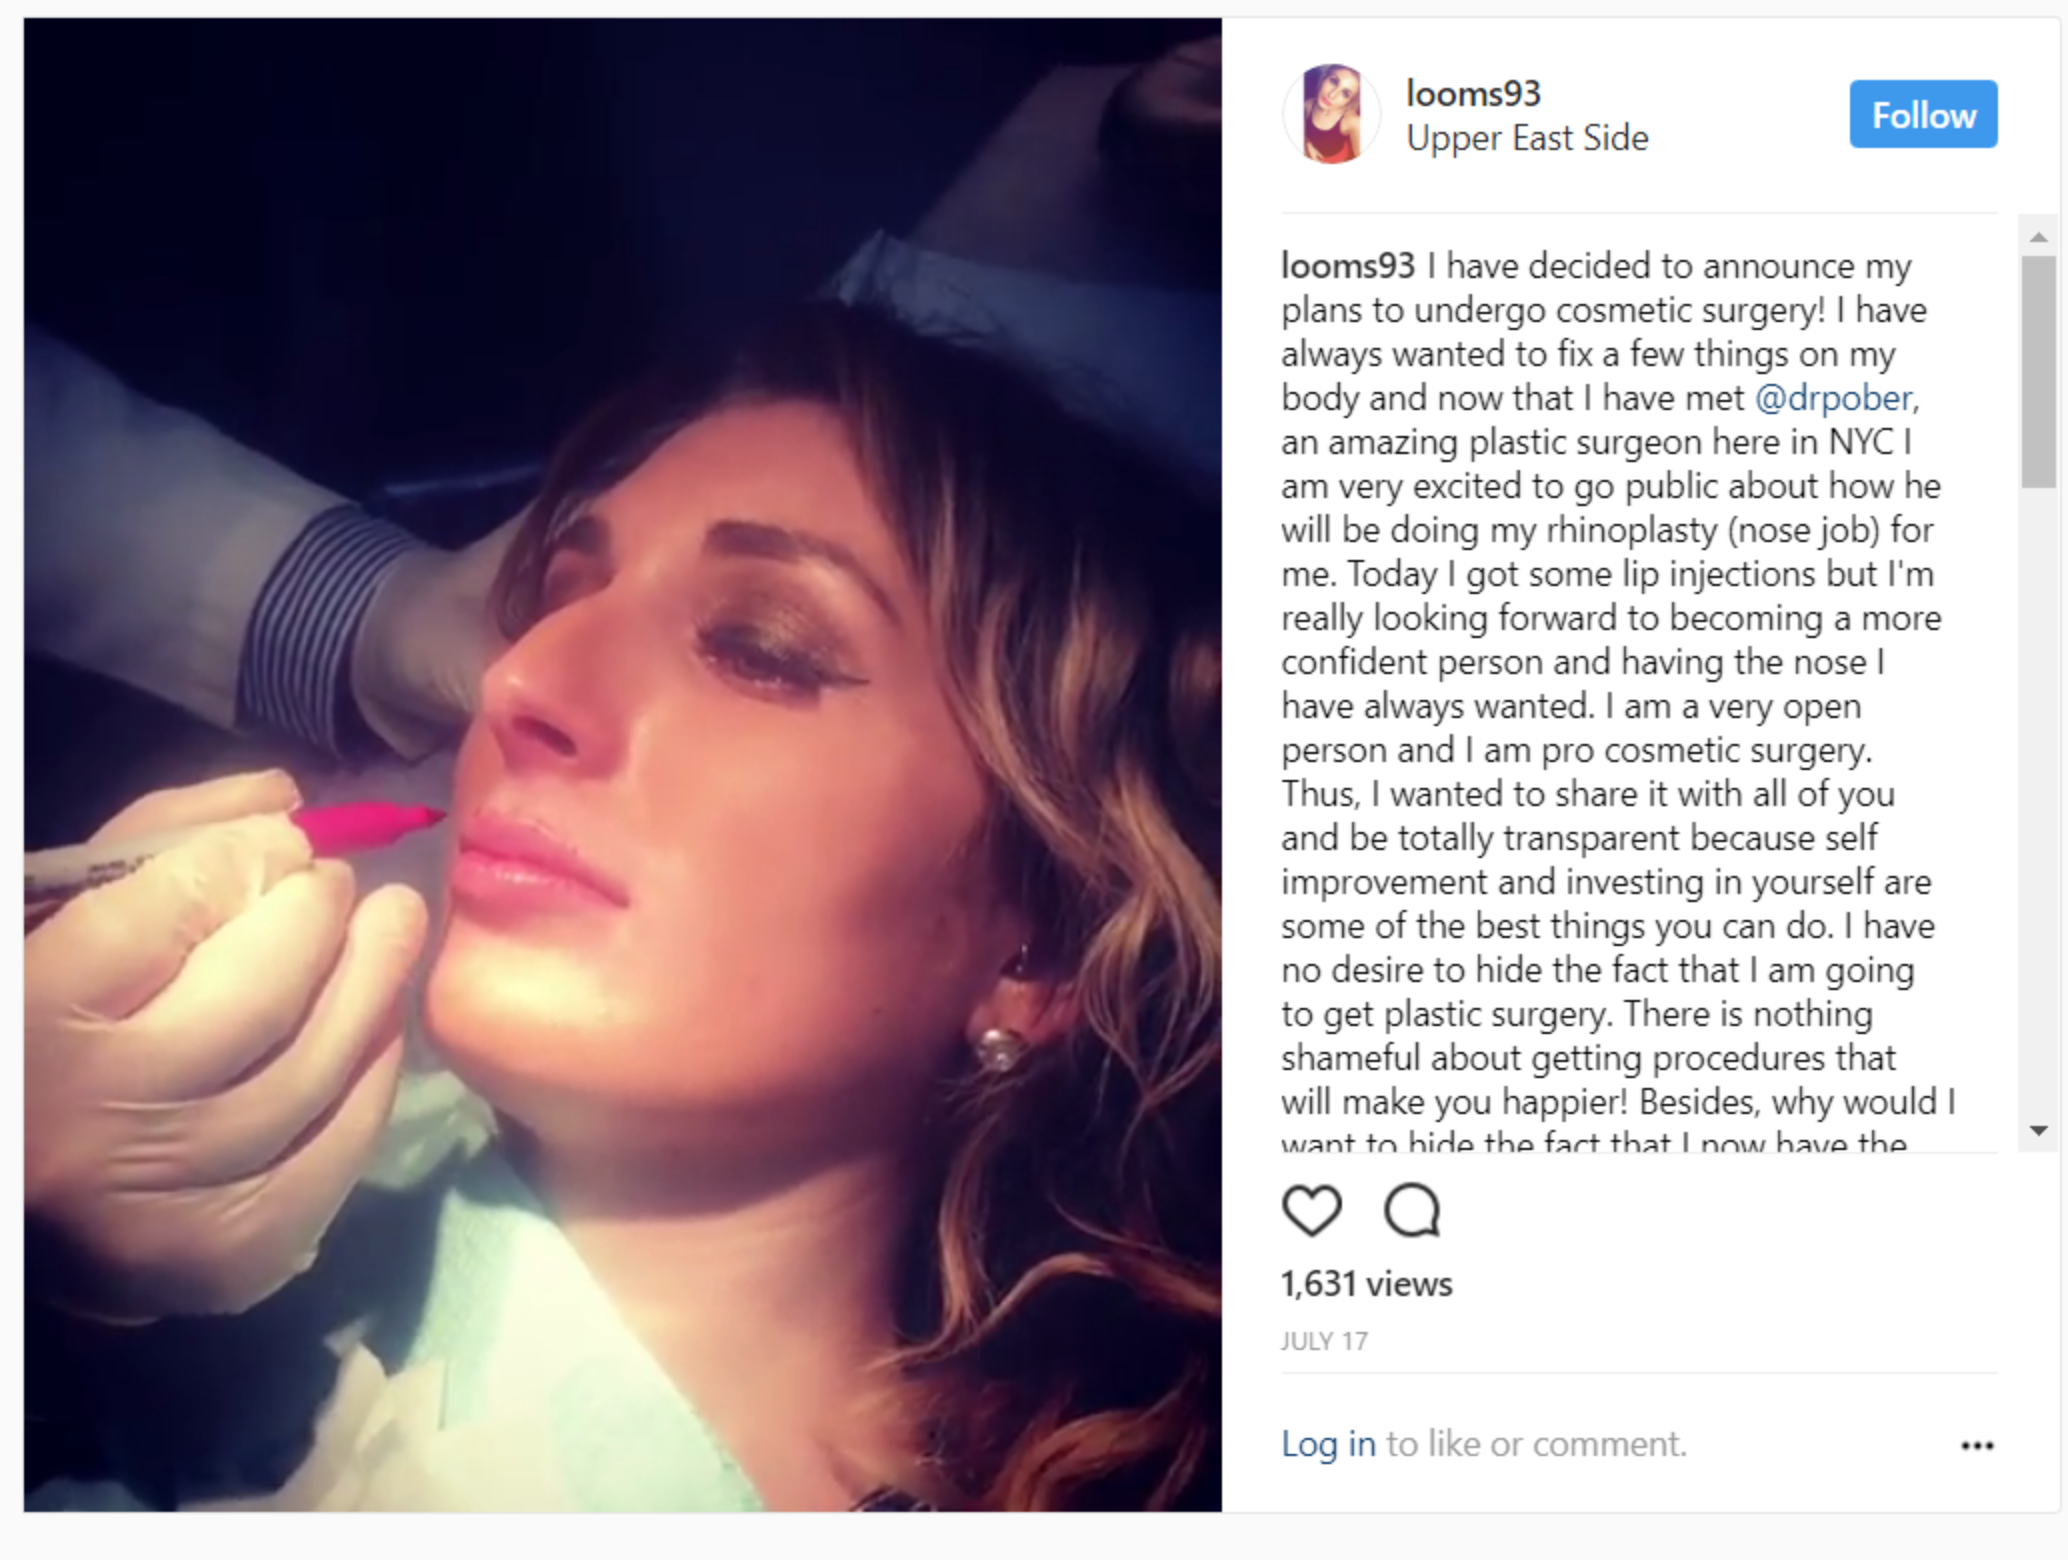 laura loomer nose - looms93 Upper East Side looms93 I have decided to announce my plans to undergo cosmetic surgery! I have always wanted to fix a few things on my body and now that I have met , an amazing plastic surgeon here in Nyc am very excited to go